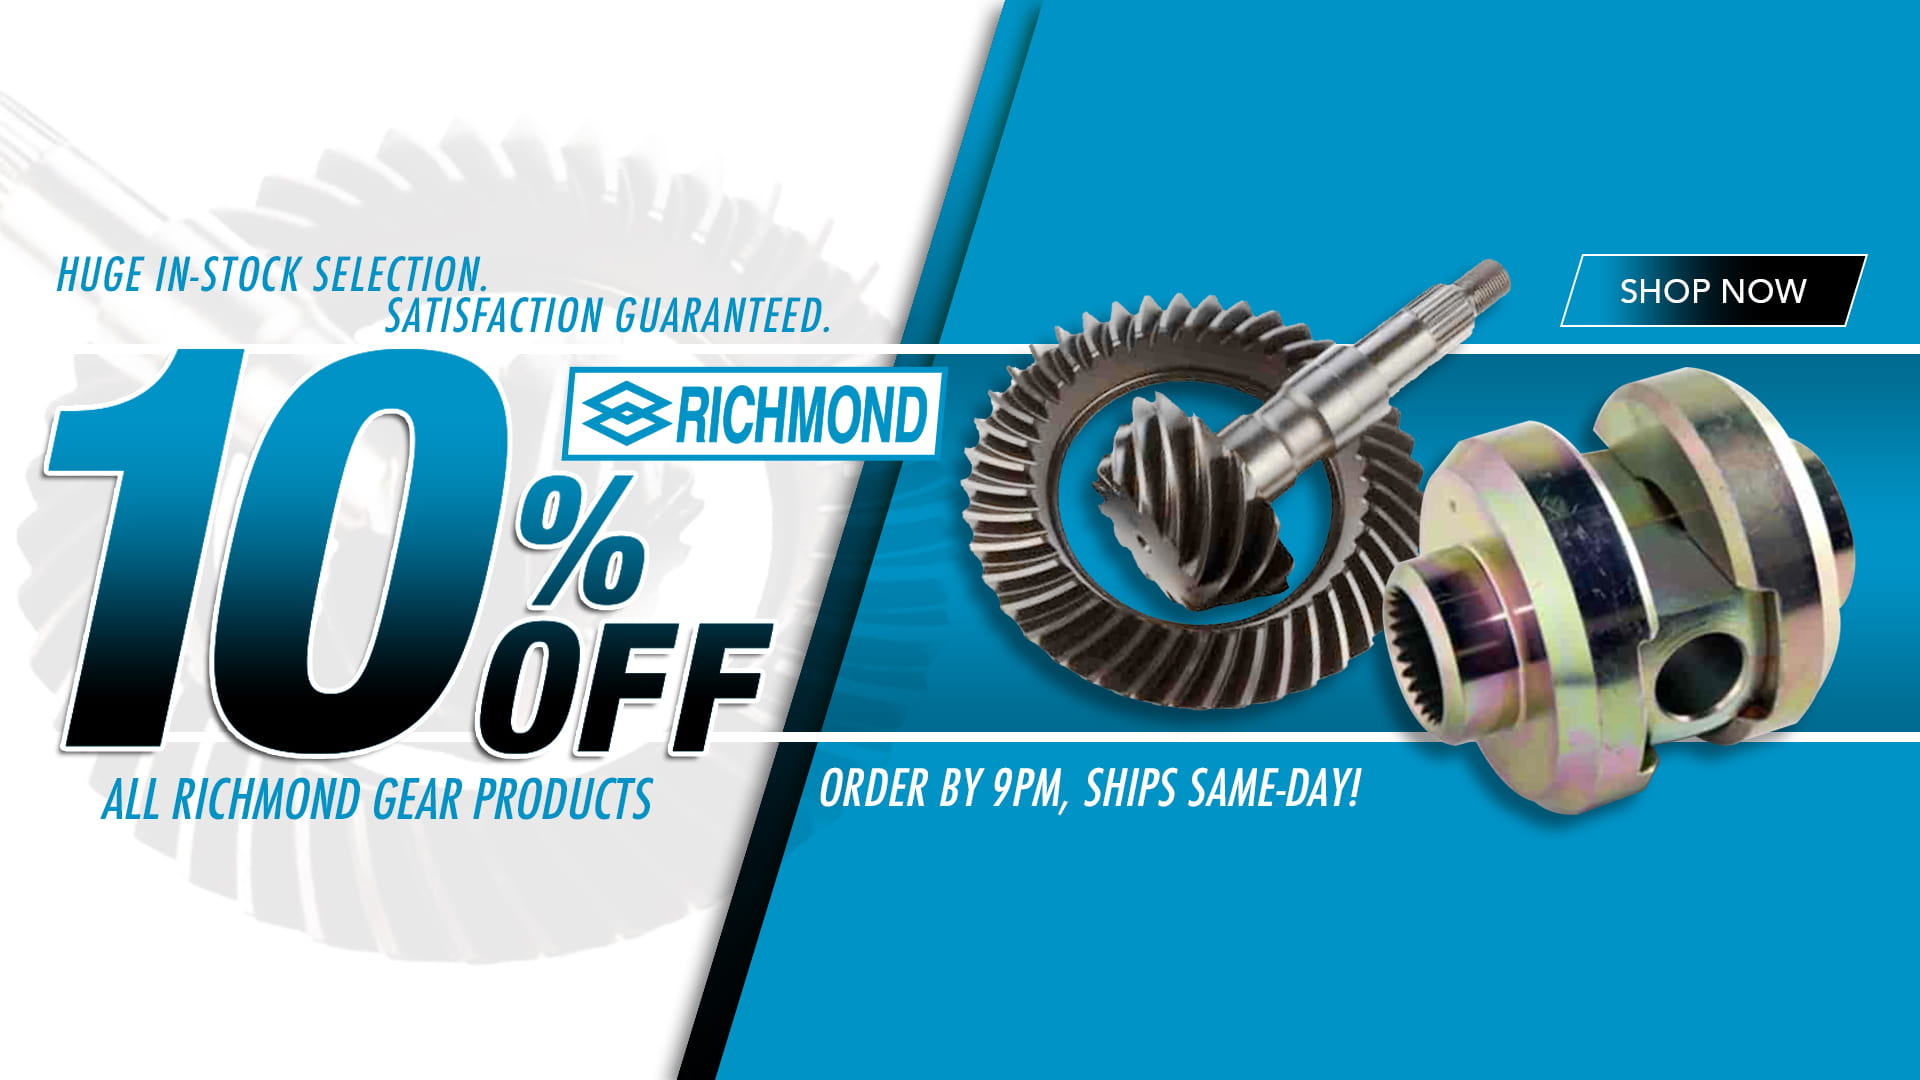 Save 10% on All Richmond Gear Products